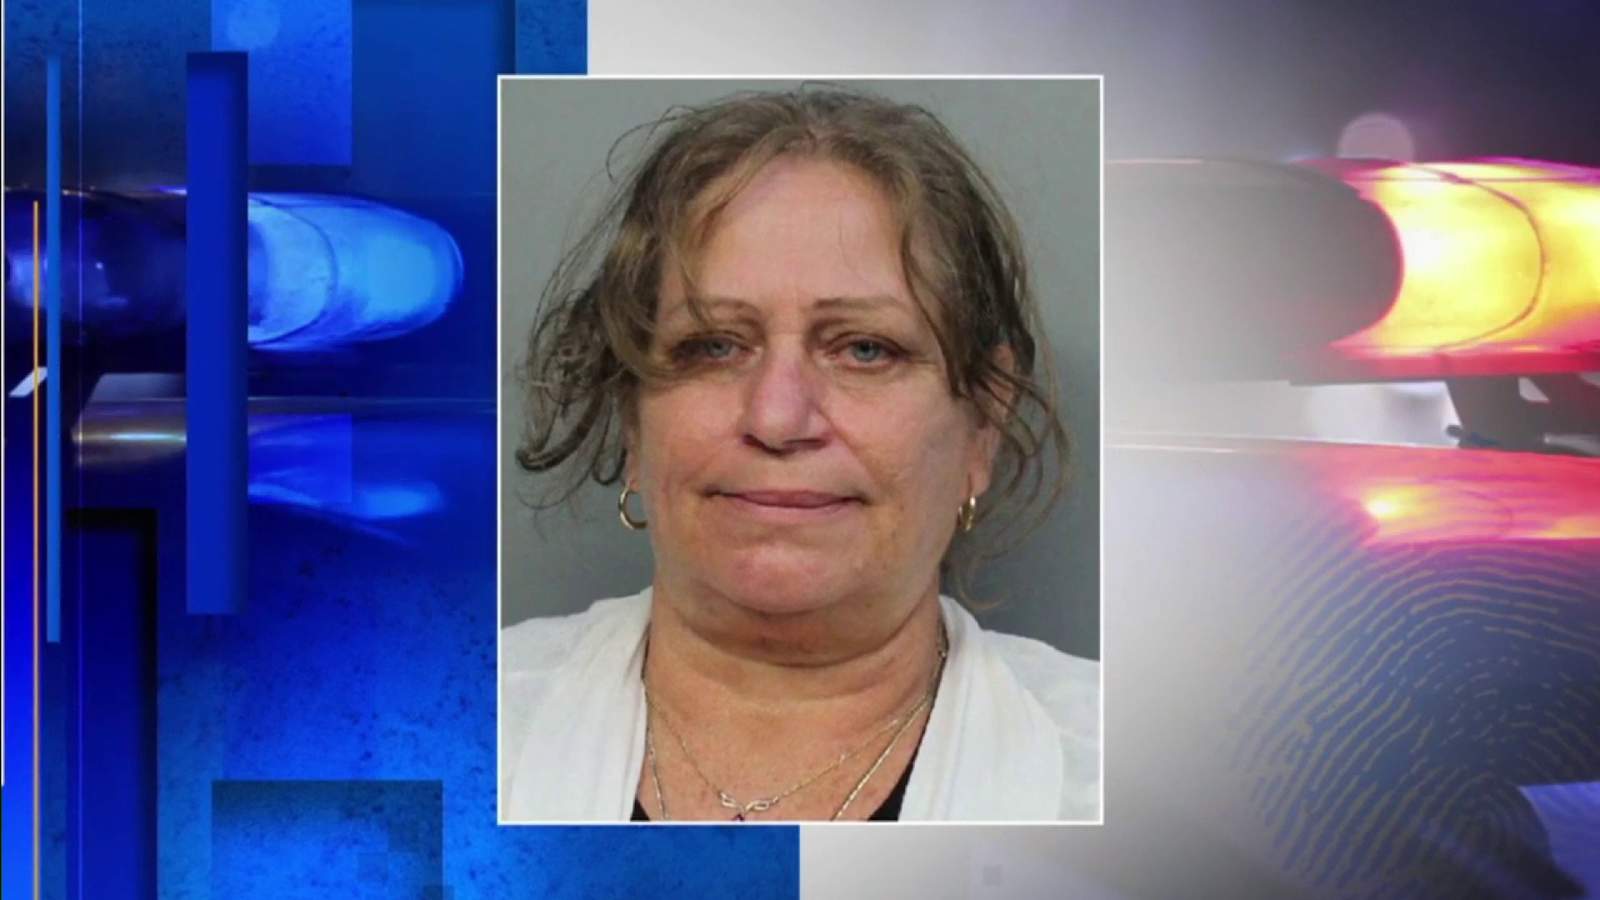 Miami schools special needs teacher arrested, fired for alleged neglect, abuse